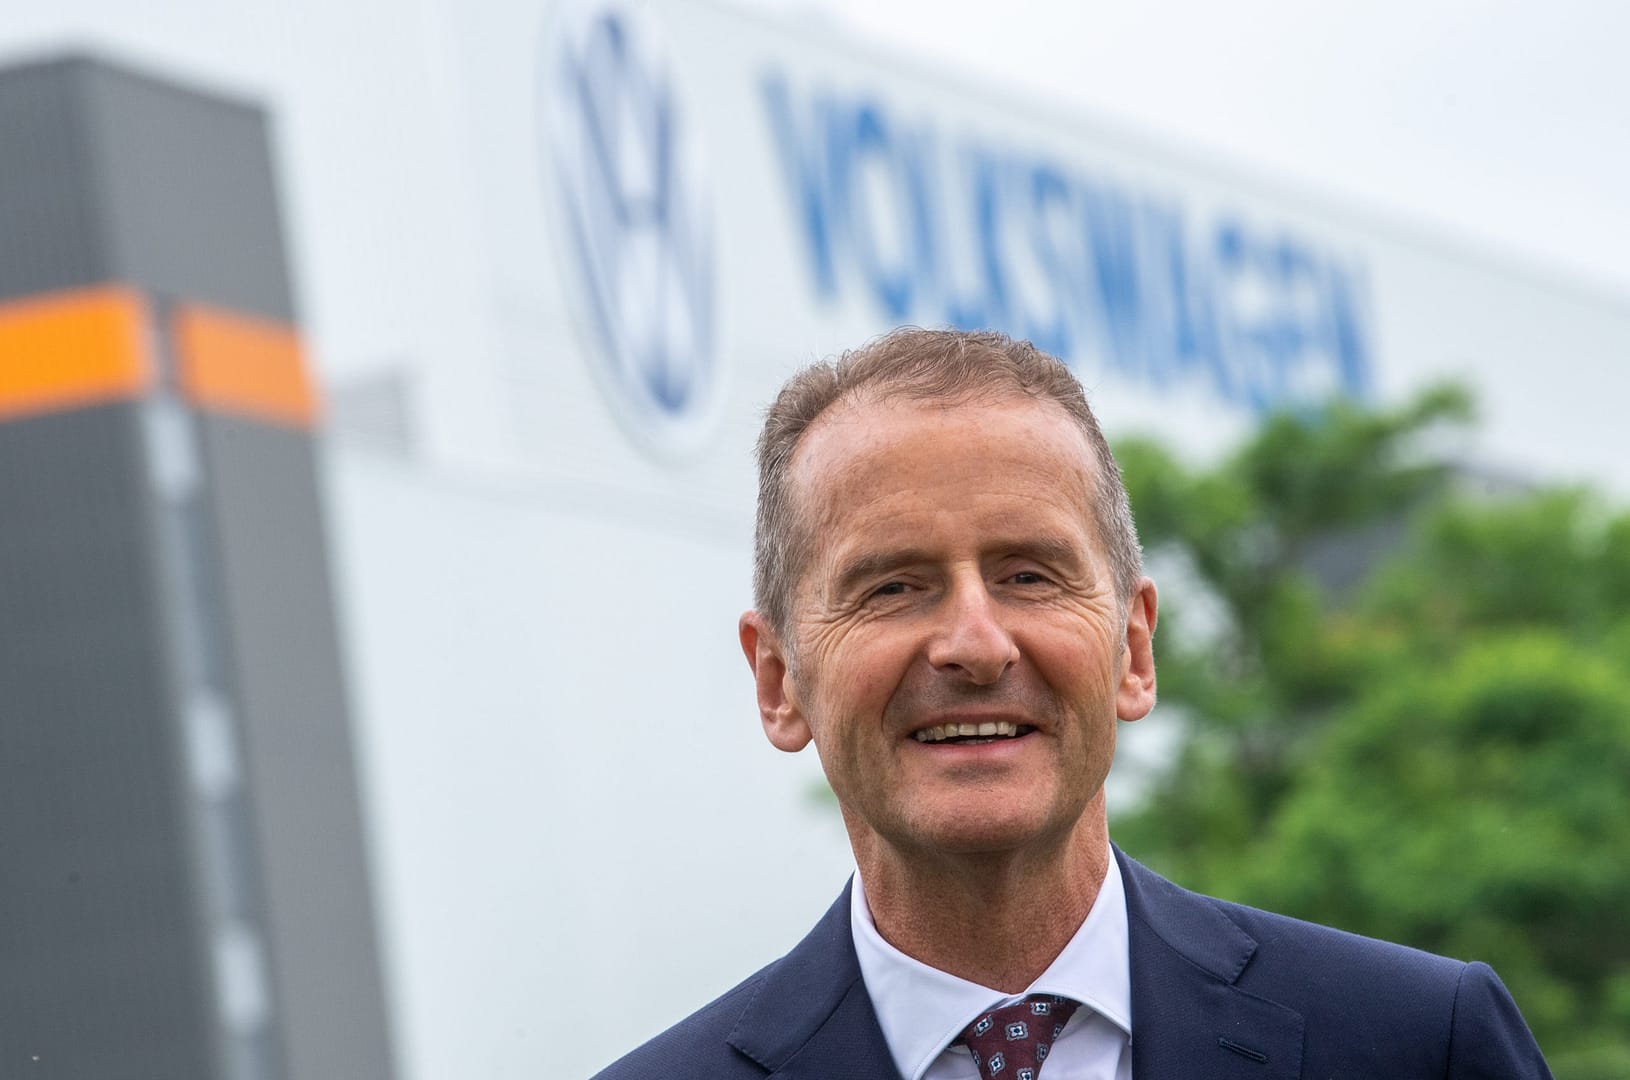 After two attempts, VW boss Herbert Diess' contract was prematurely extended.